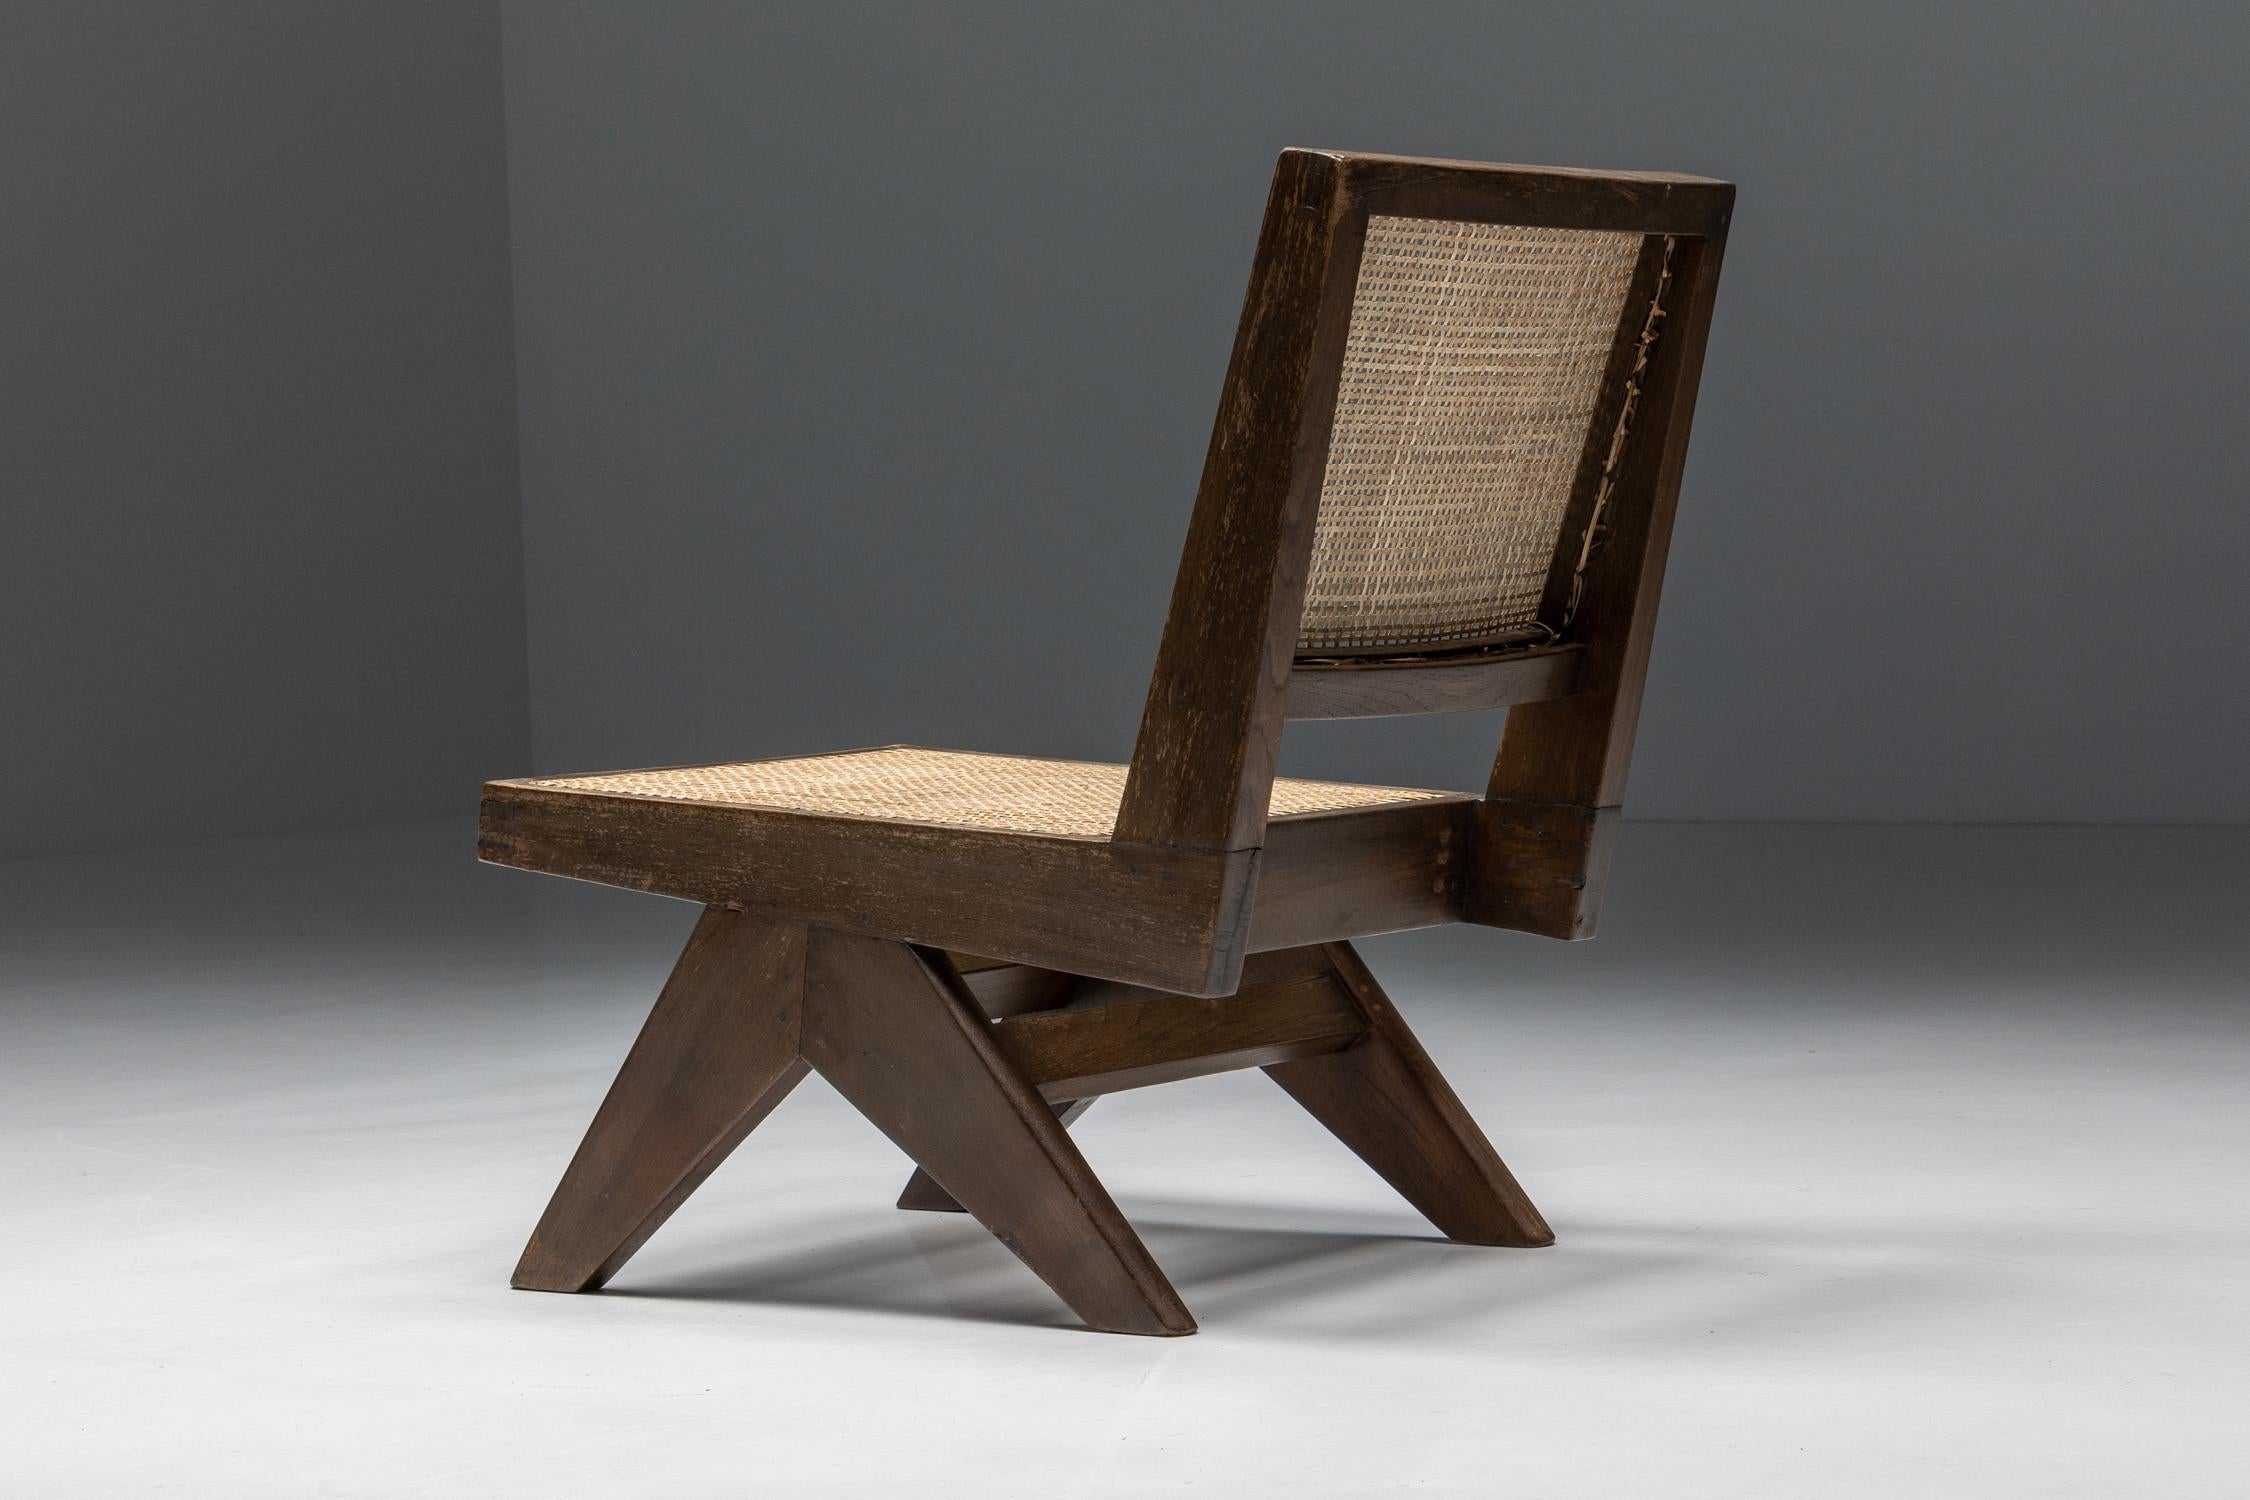 Indian Armless Easy Chair by Pierre Jeanneret rattan, teak & wood, Chandigarh, 1960s For Sale